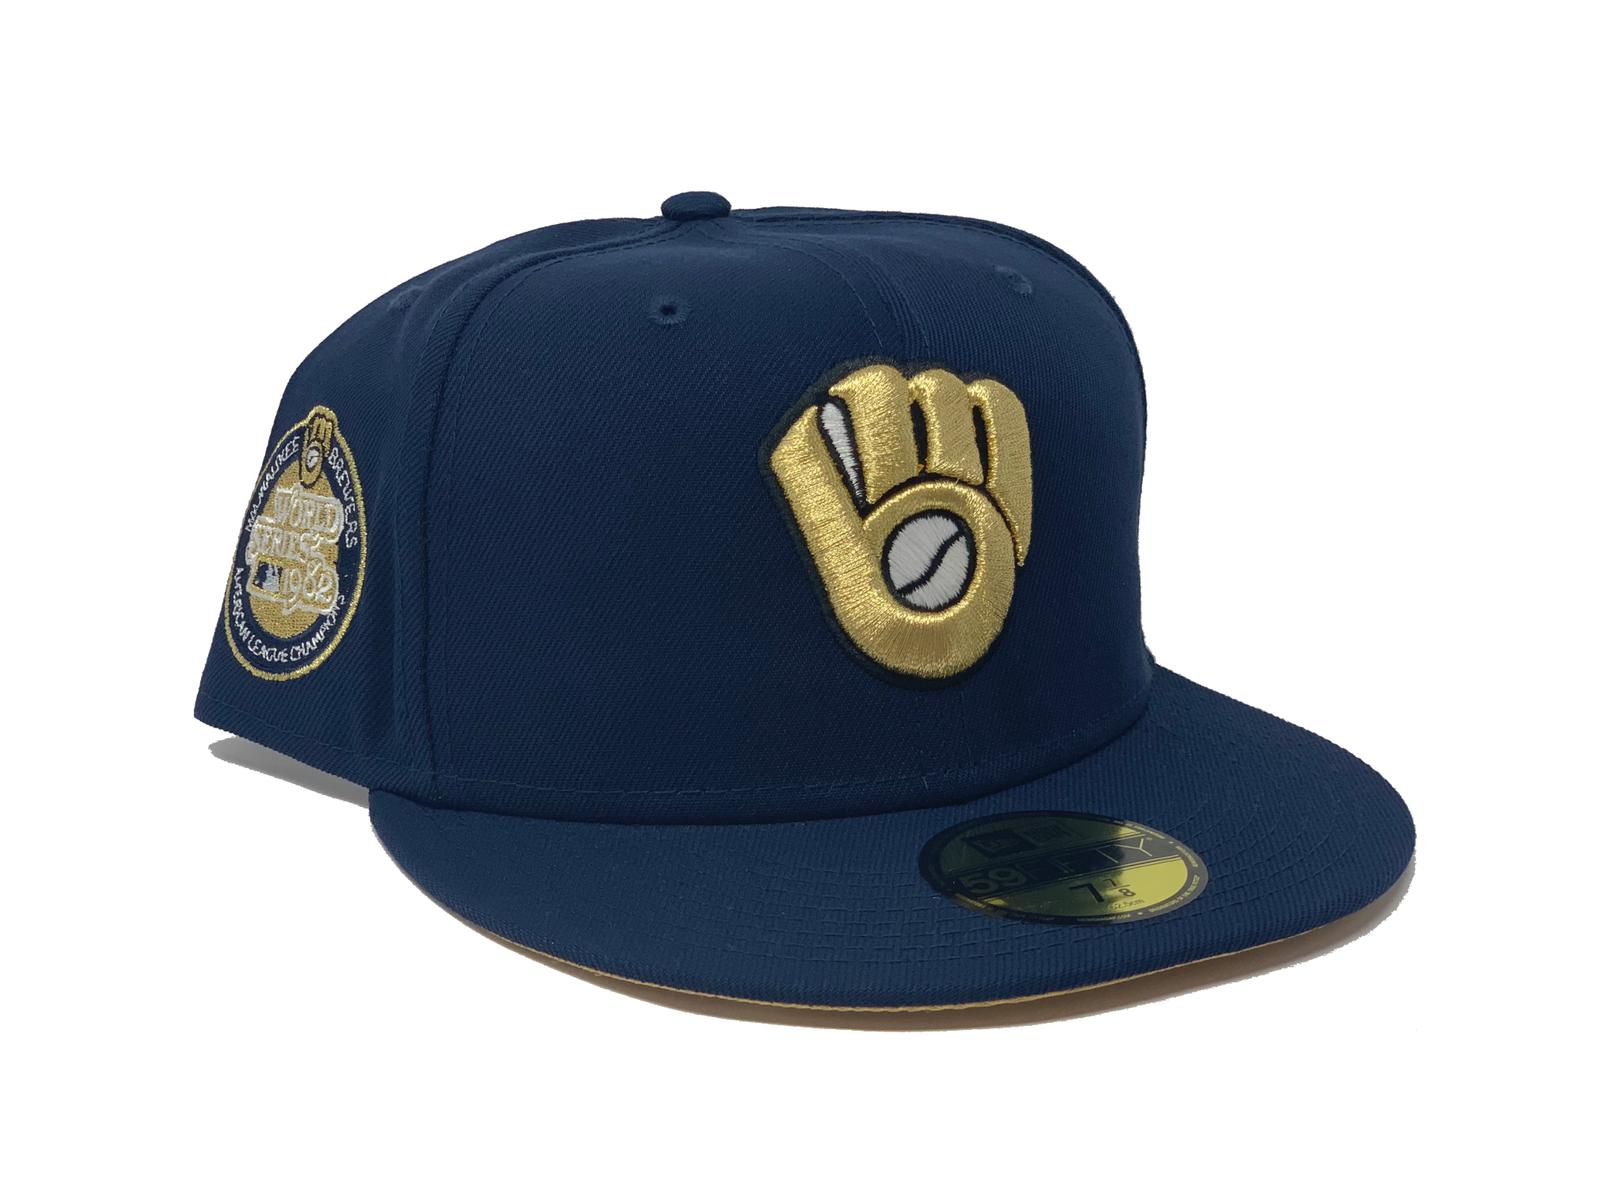 New Era Milwaukee Brewers World Series 1982 Sweet Gingerbread Edition  59Fifty Fitted Hat, EXCLUSIVE HATS, CAPS